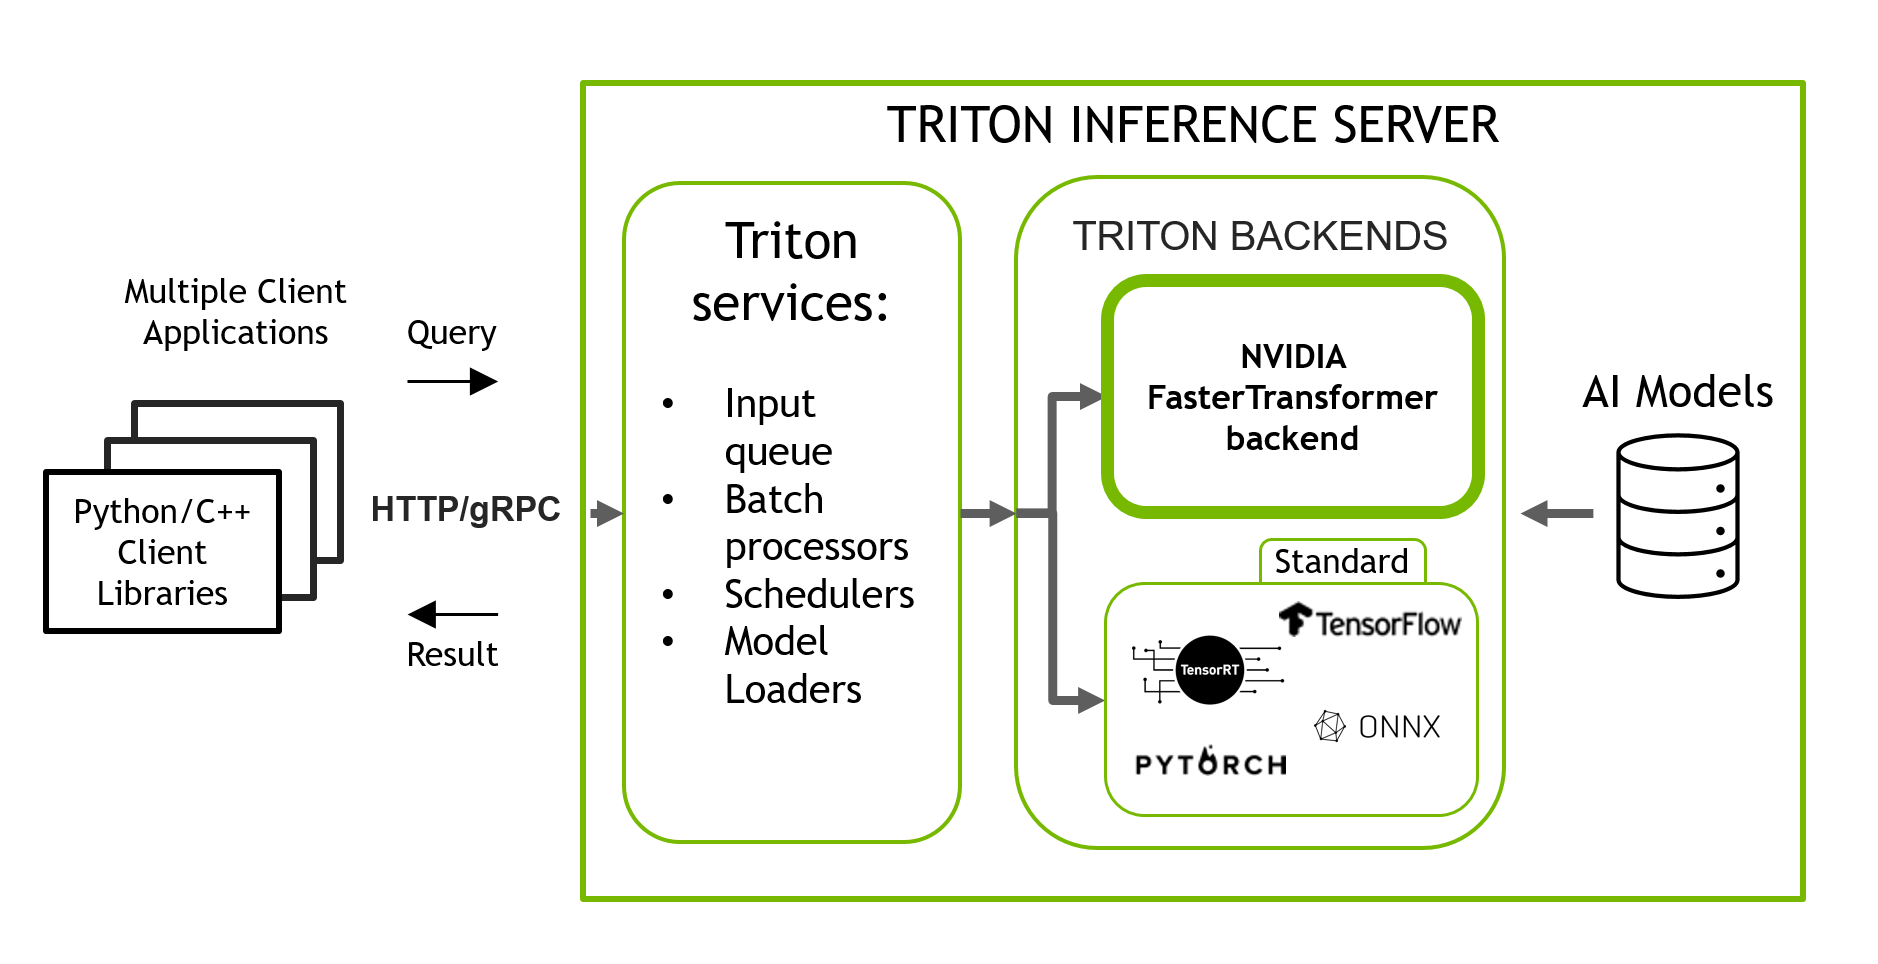 Diagram showing Triton inference server with multiple backends for inference of model trained with different frameworks
